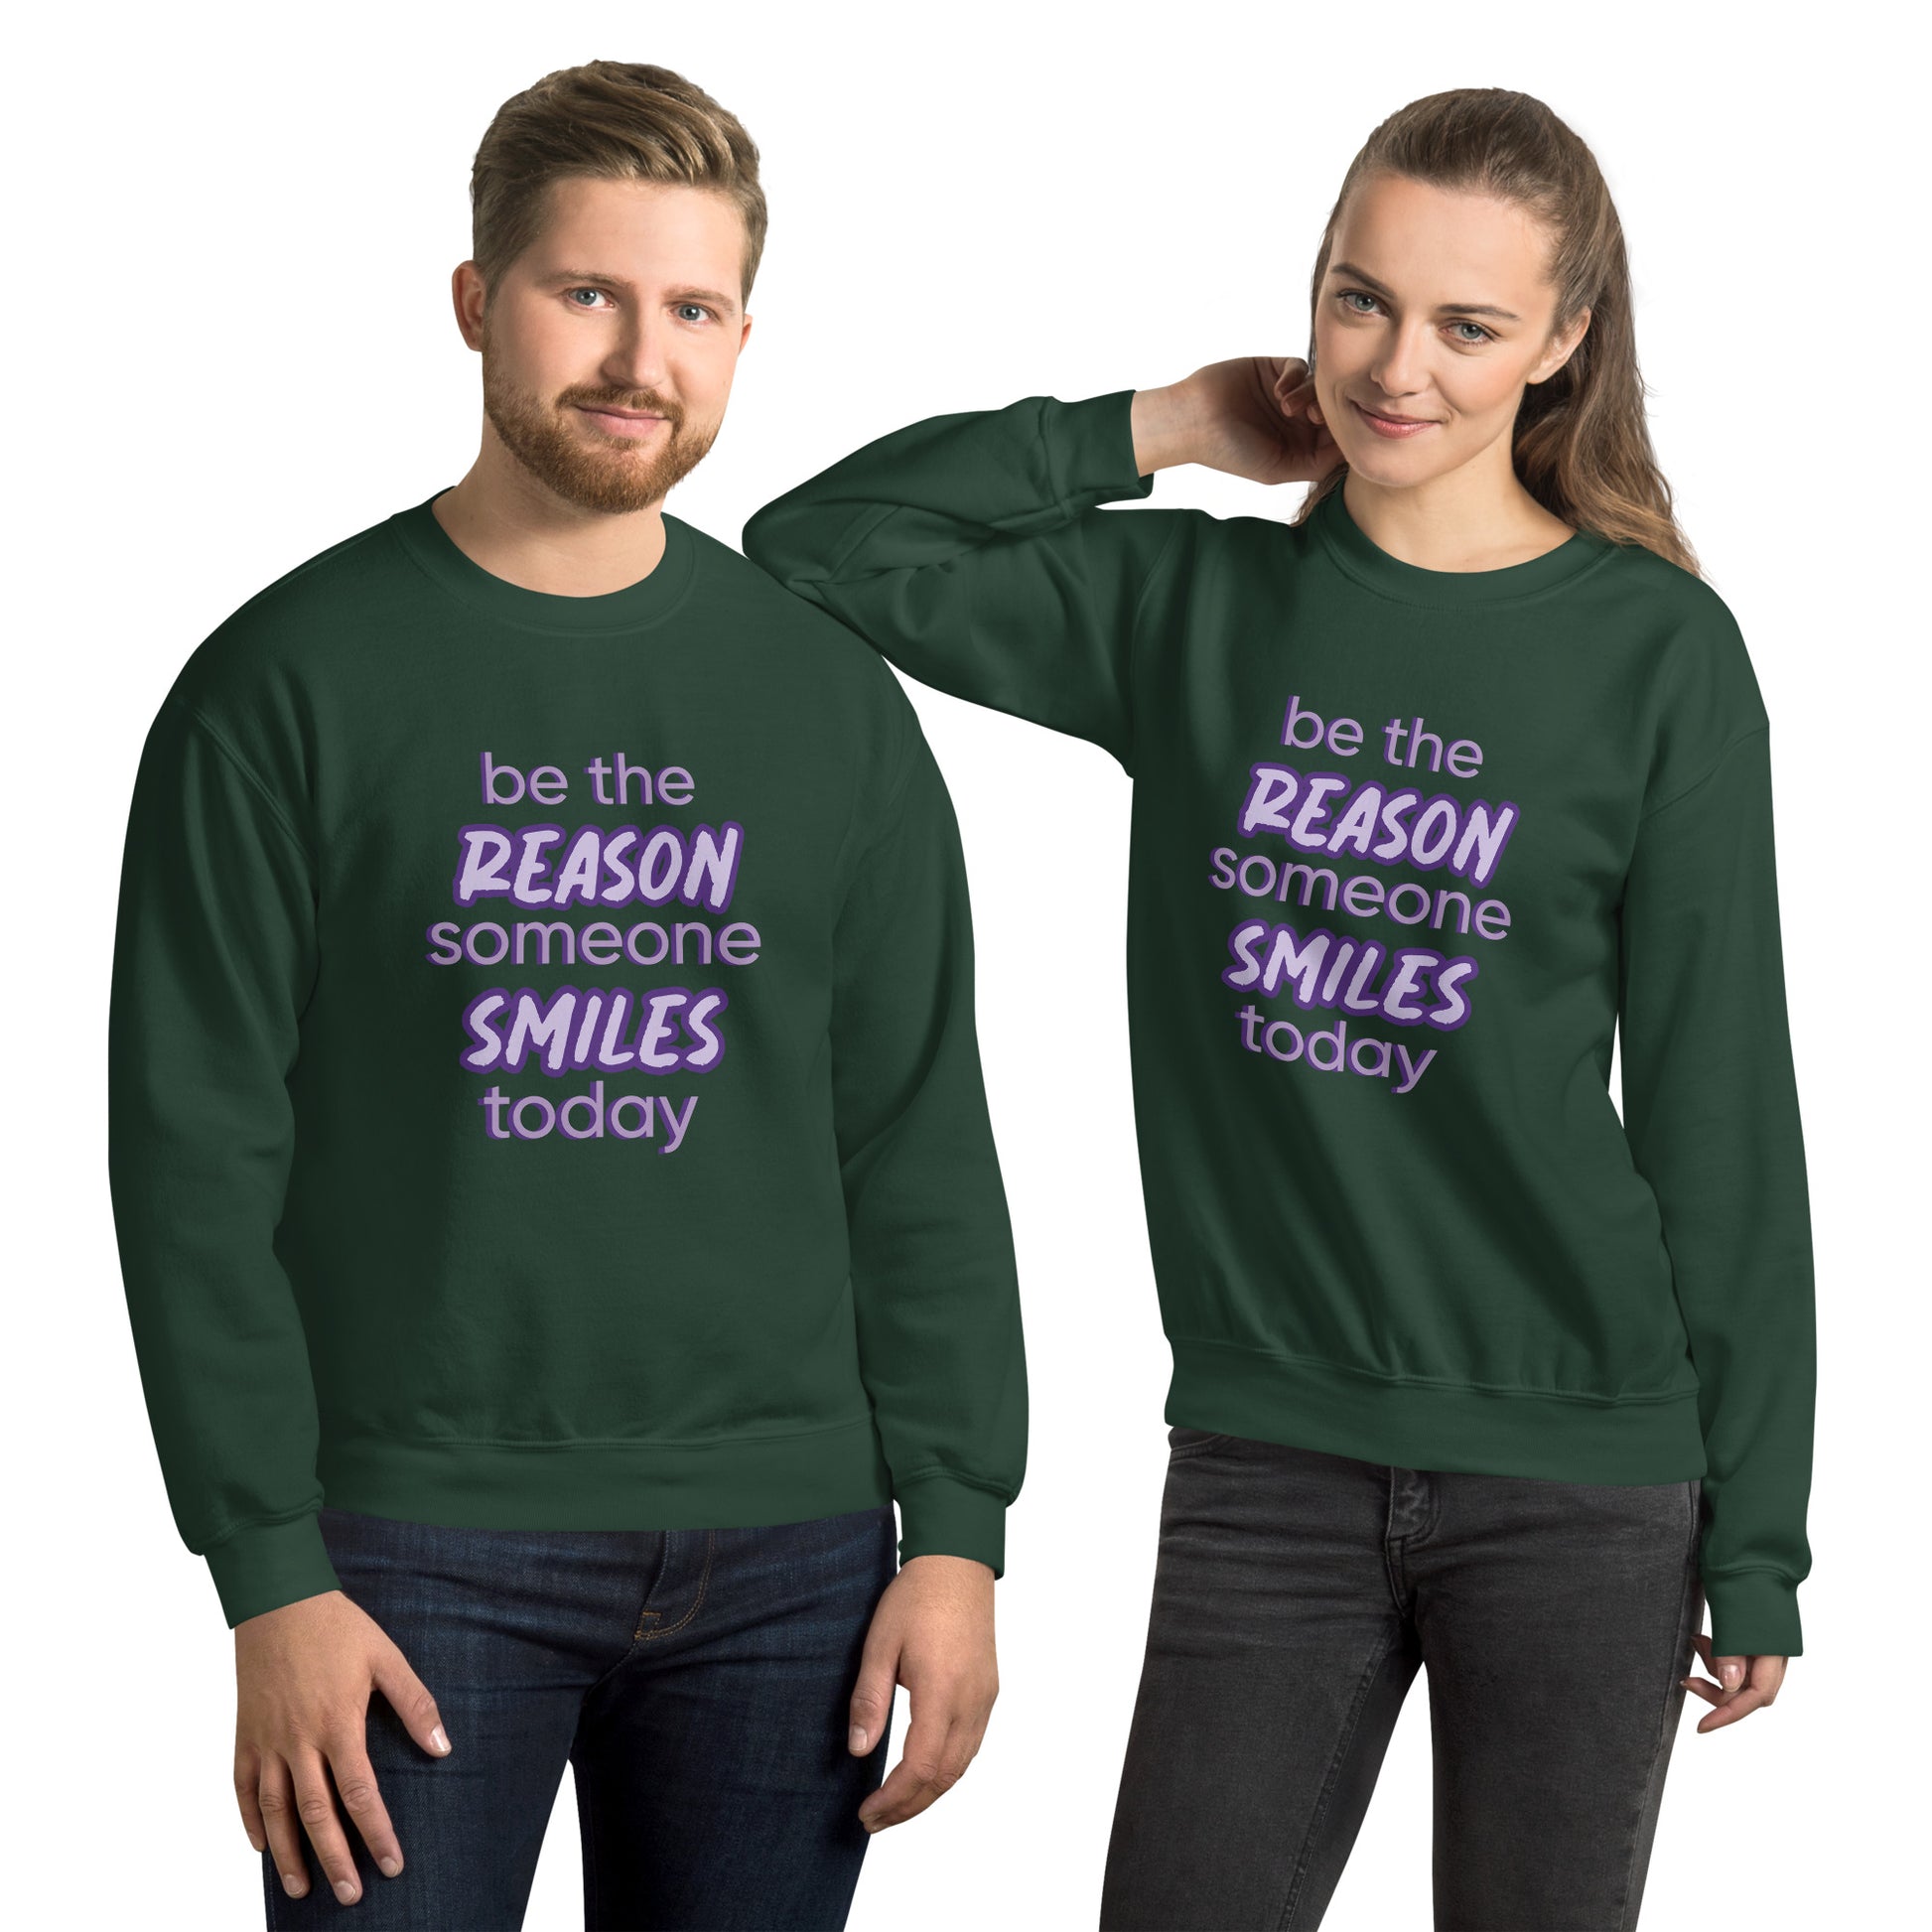 Men and women with forest green sweater and the quote "be the reason someone smiles today" in purple on it. 